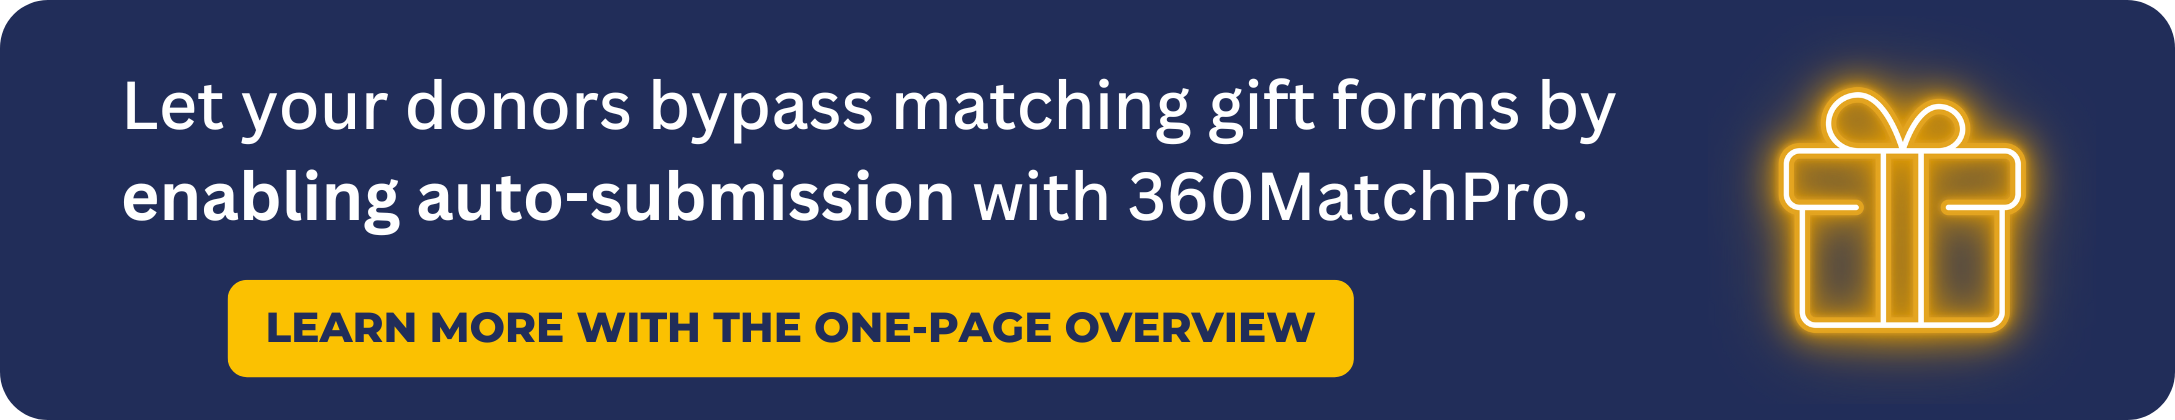 Bypass matching gift forms with 360MatchPro's auto-submission